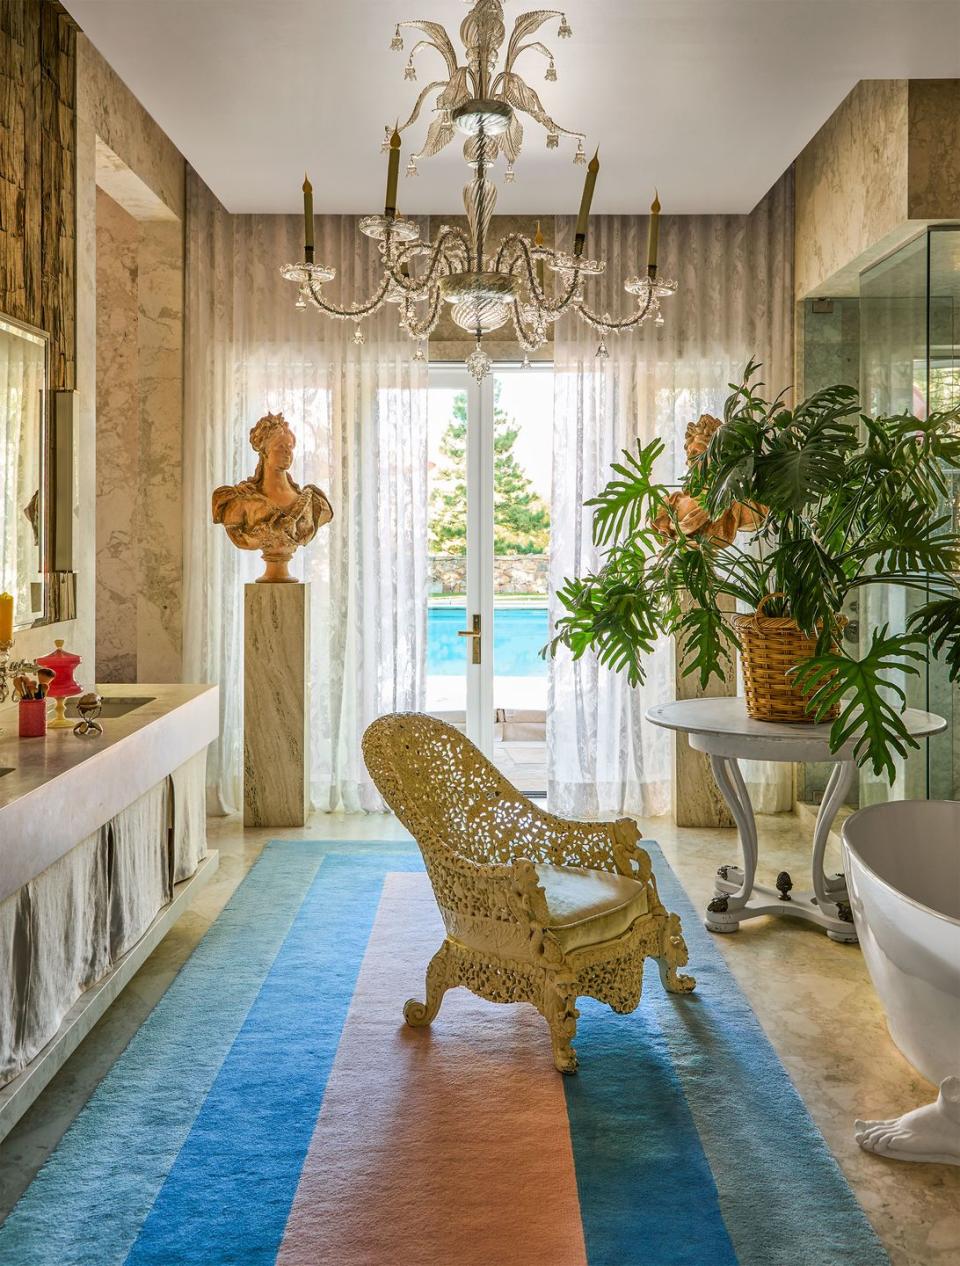 a footed bathtub, an antique chair, counter and twin sinks, plinth with bust sculpture, round table with large plant in basket planter, glass chandelier, transparent curtains, glass doors open to pool